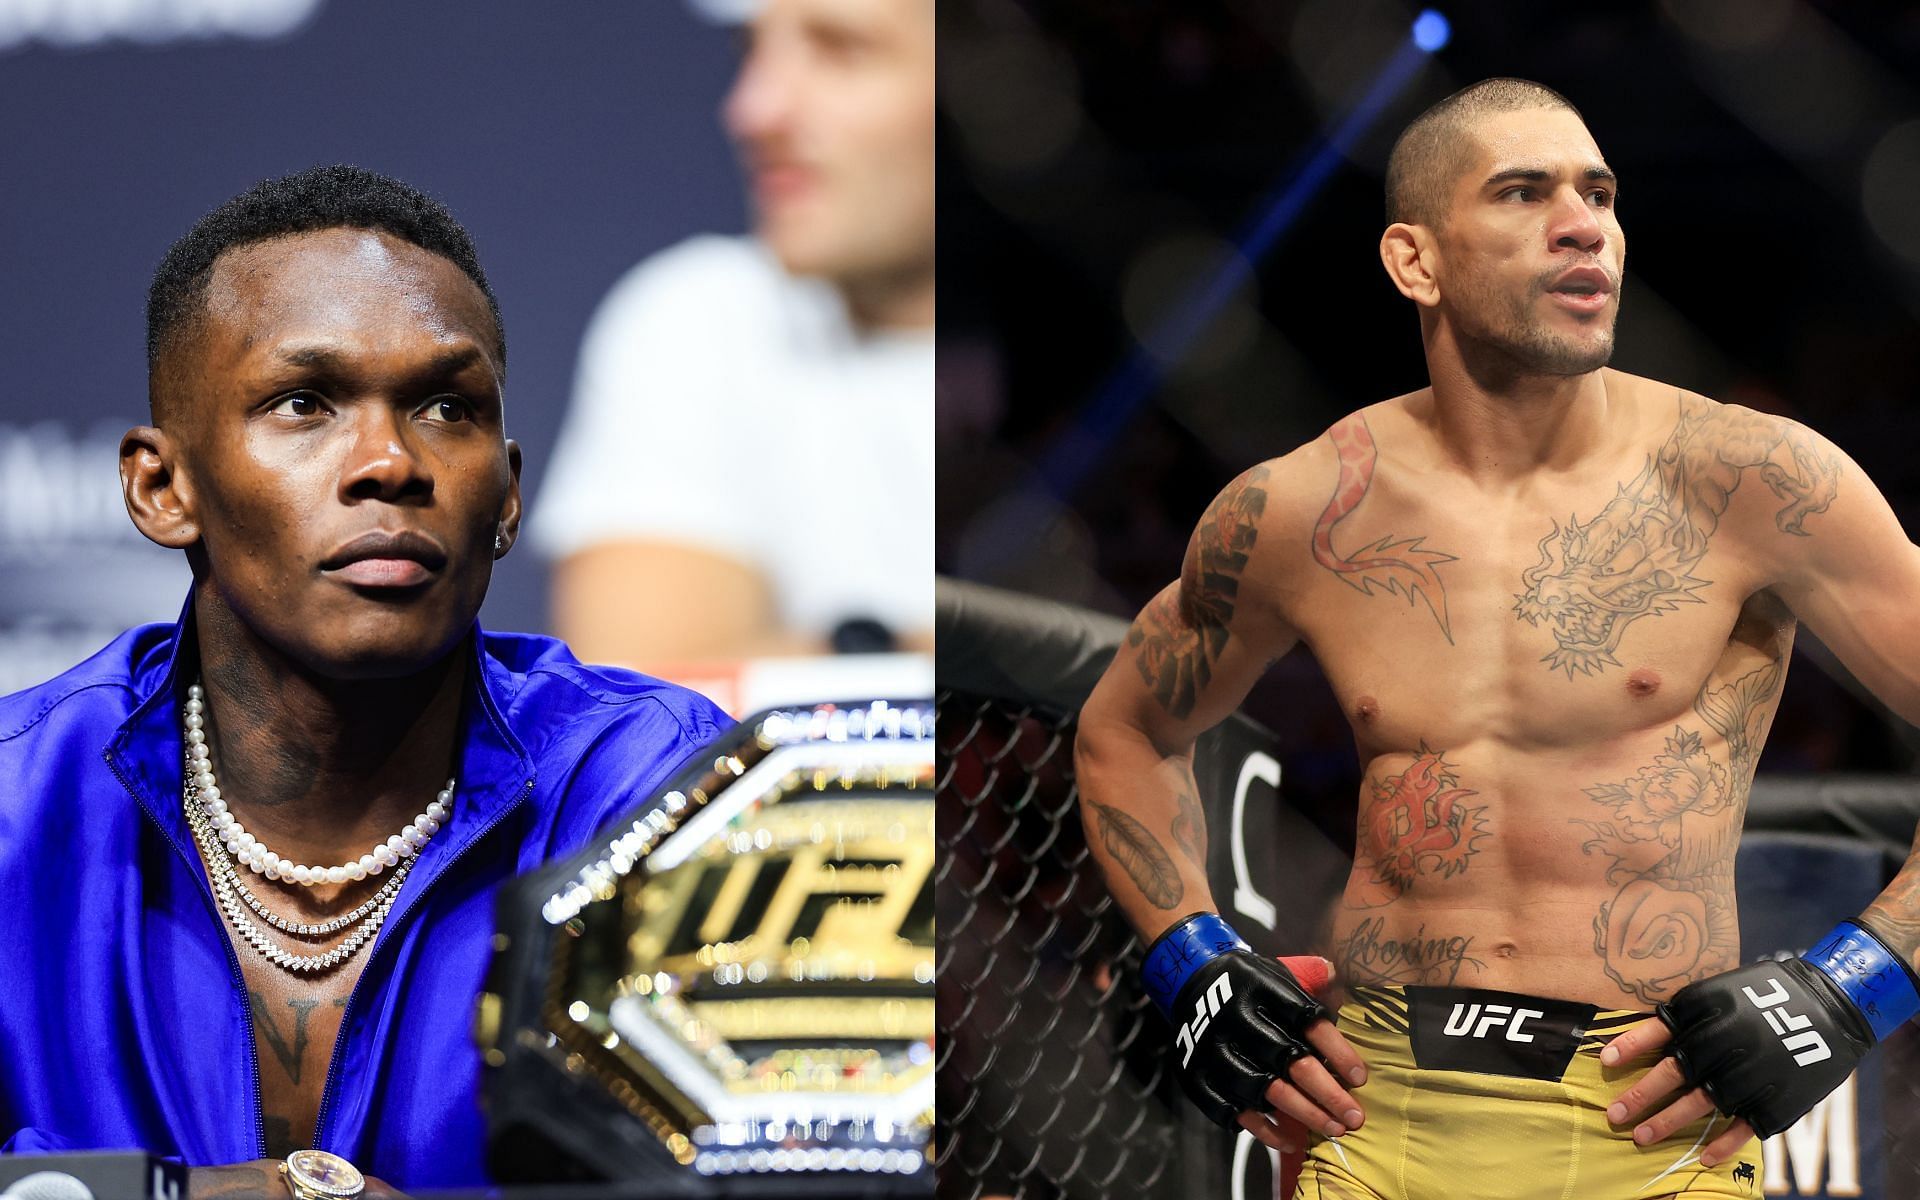 Israel Adesanya (right) and Alex Pereira (left) [Image Courtesy: Getty Images]